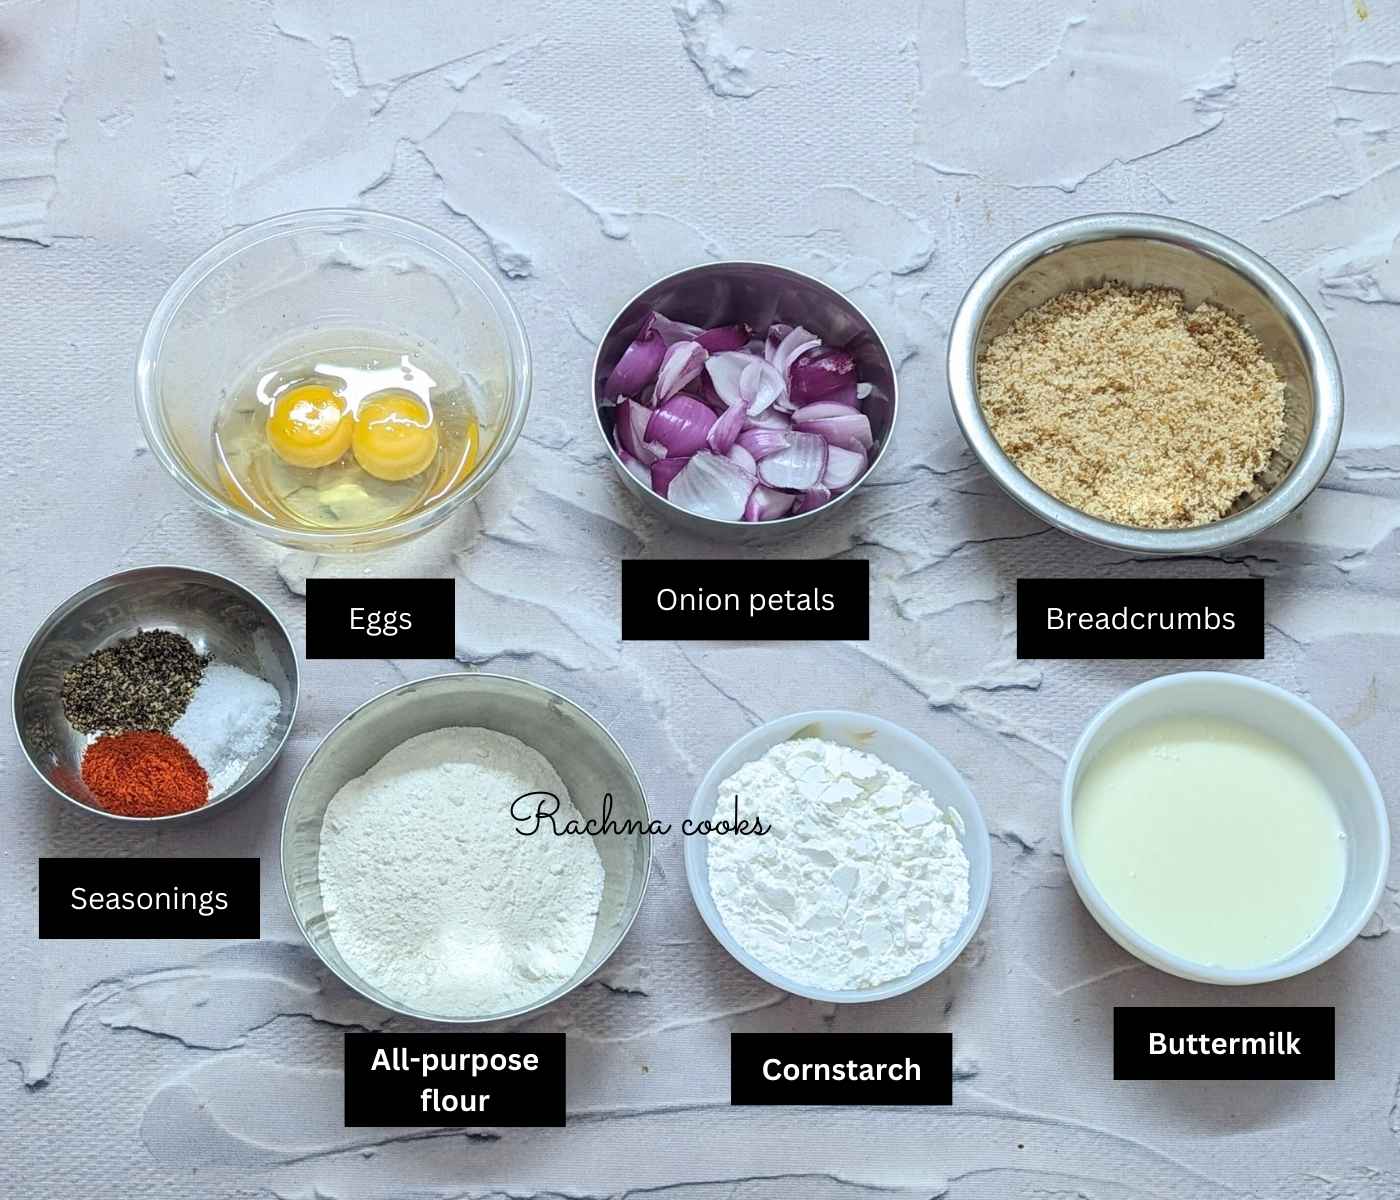 Ingredients for making crunchy onion petals in air fryer.